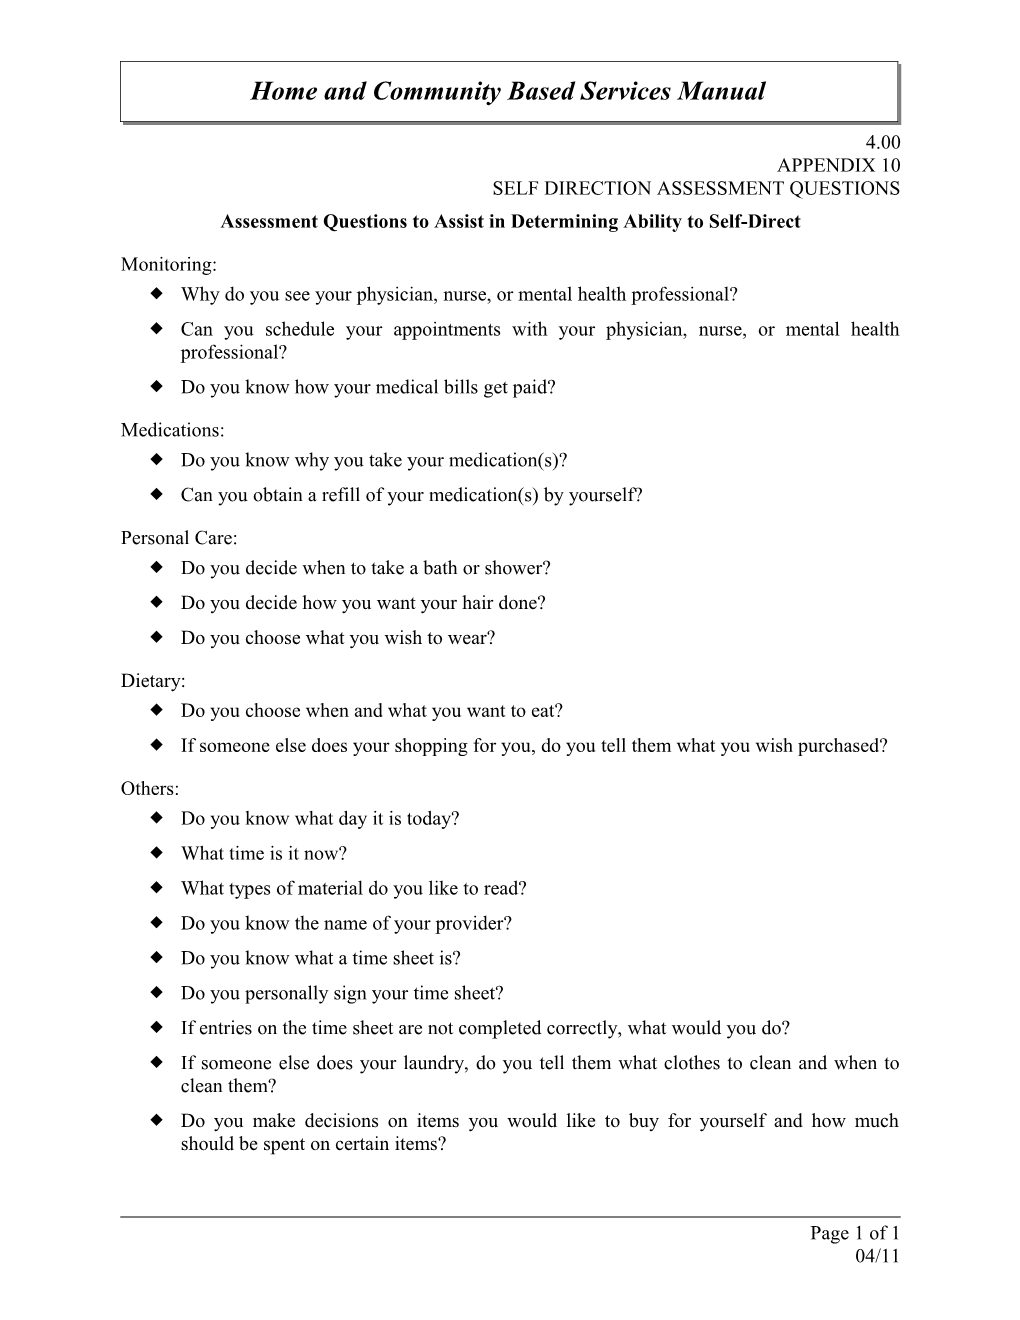 Assessment Questions to Assist in Determining Ability to Self-Direct